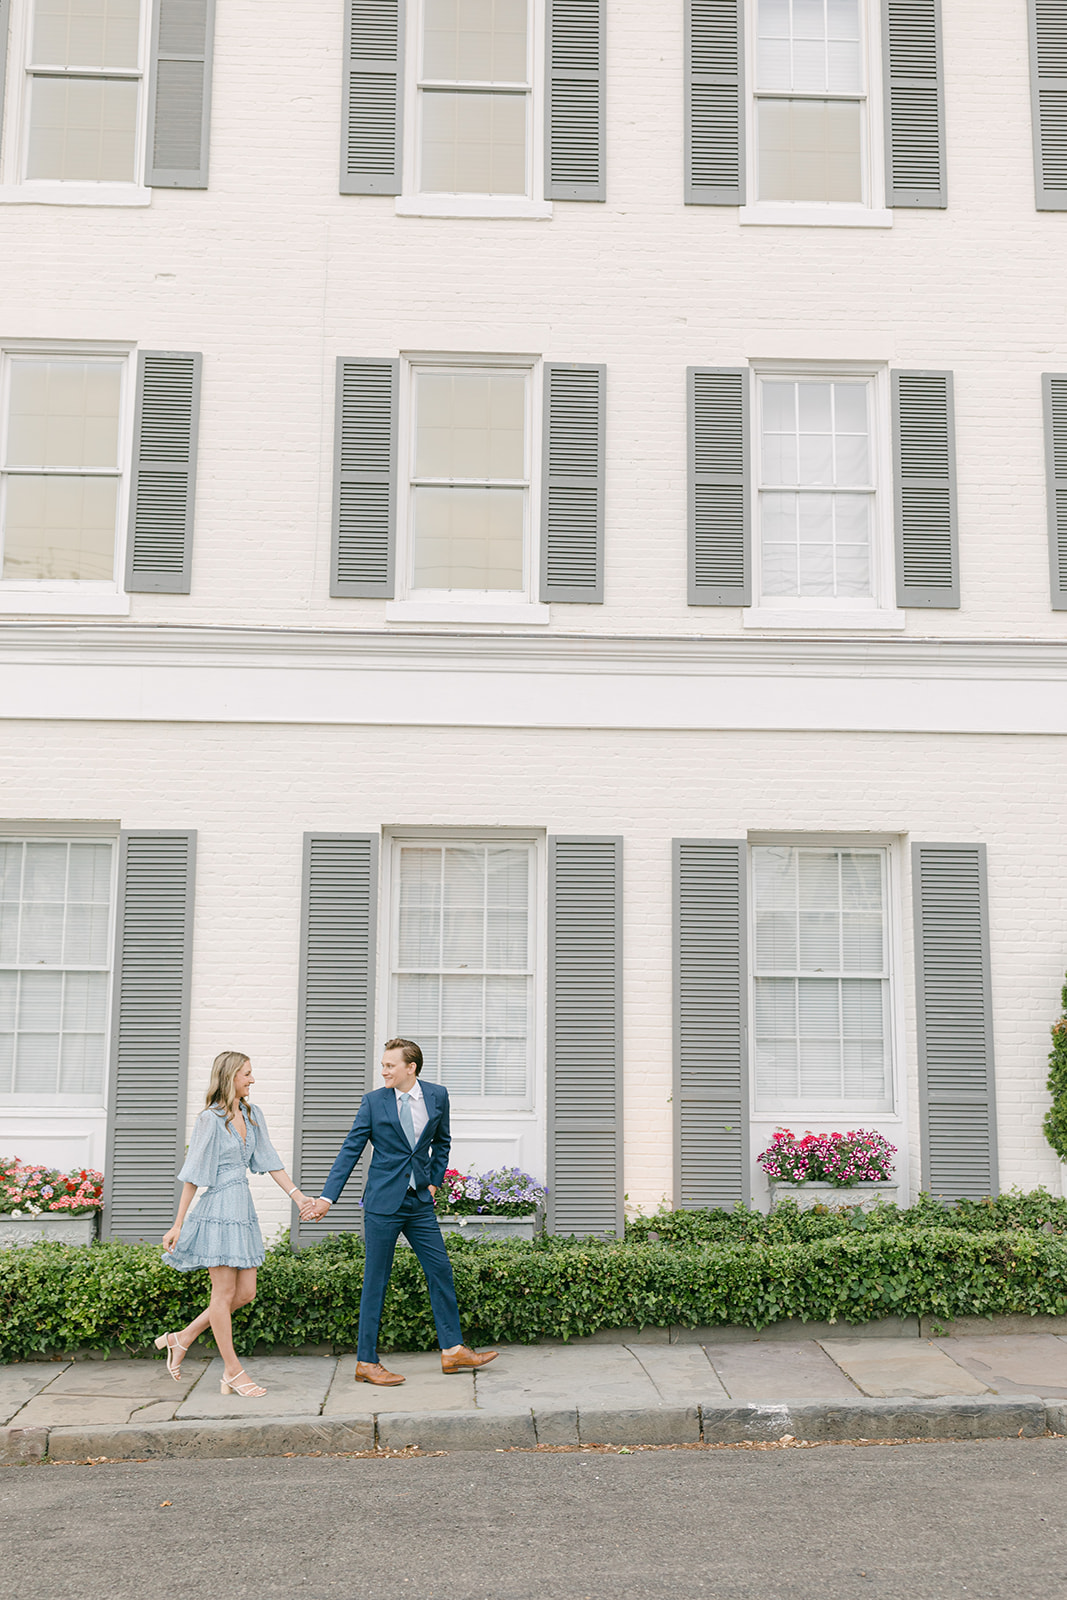 photo of engaged couple walking the streets of westport connecticut during engagement photo session